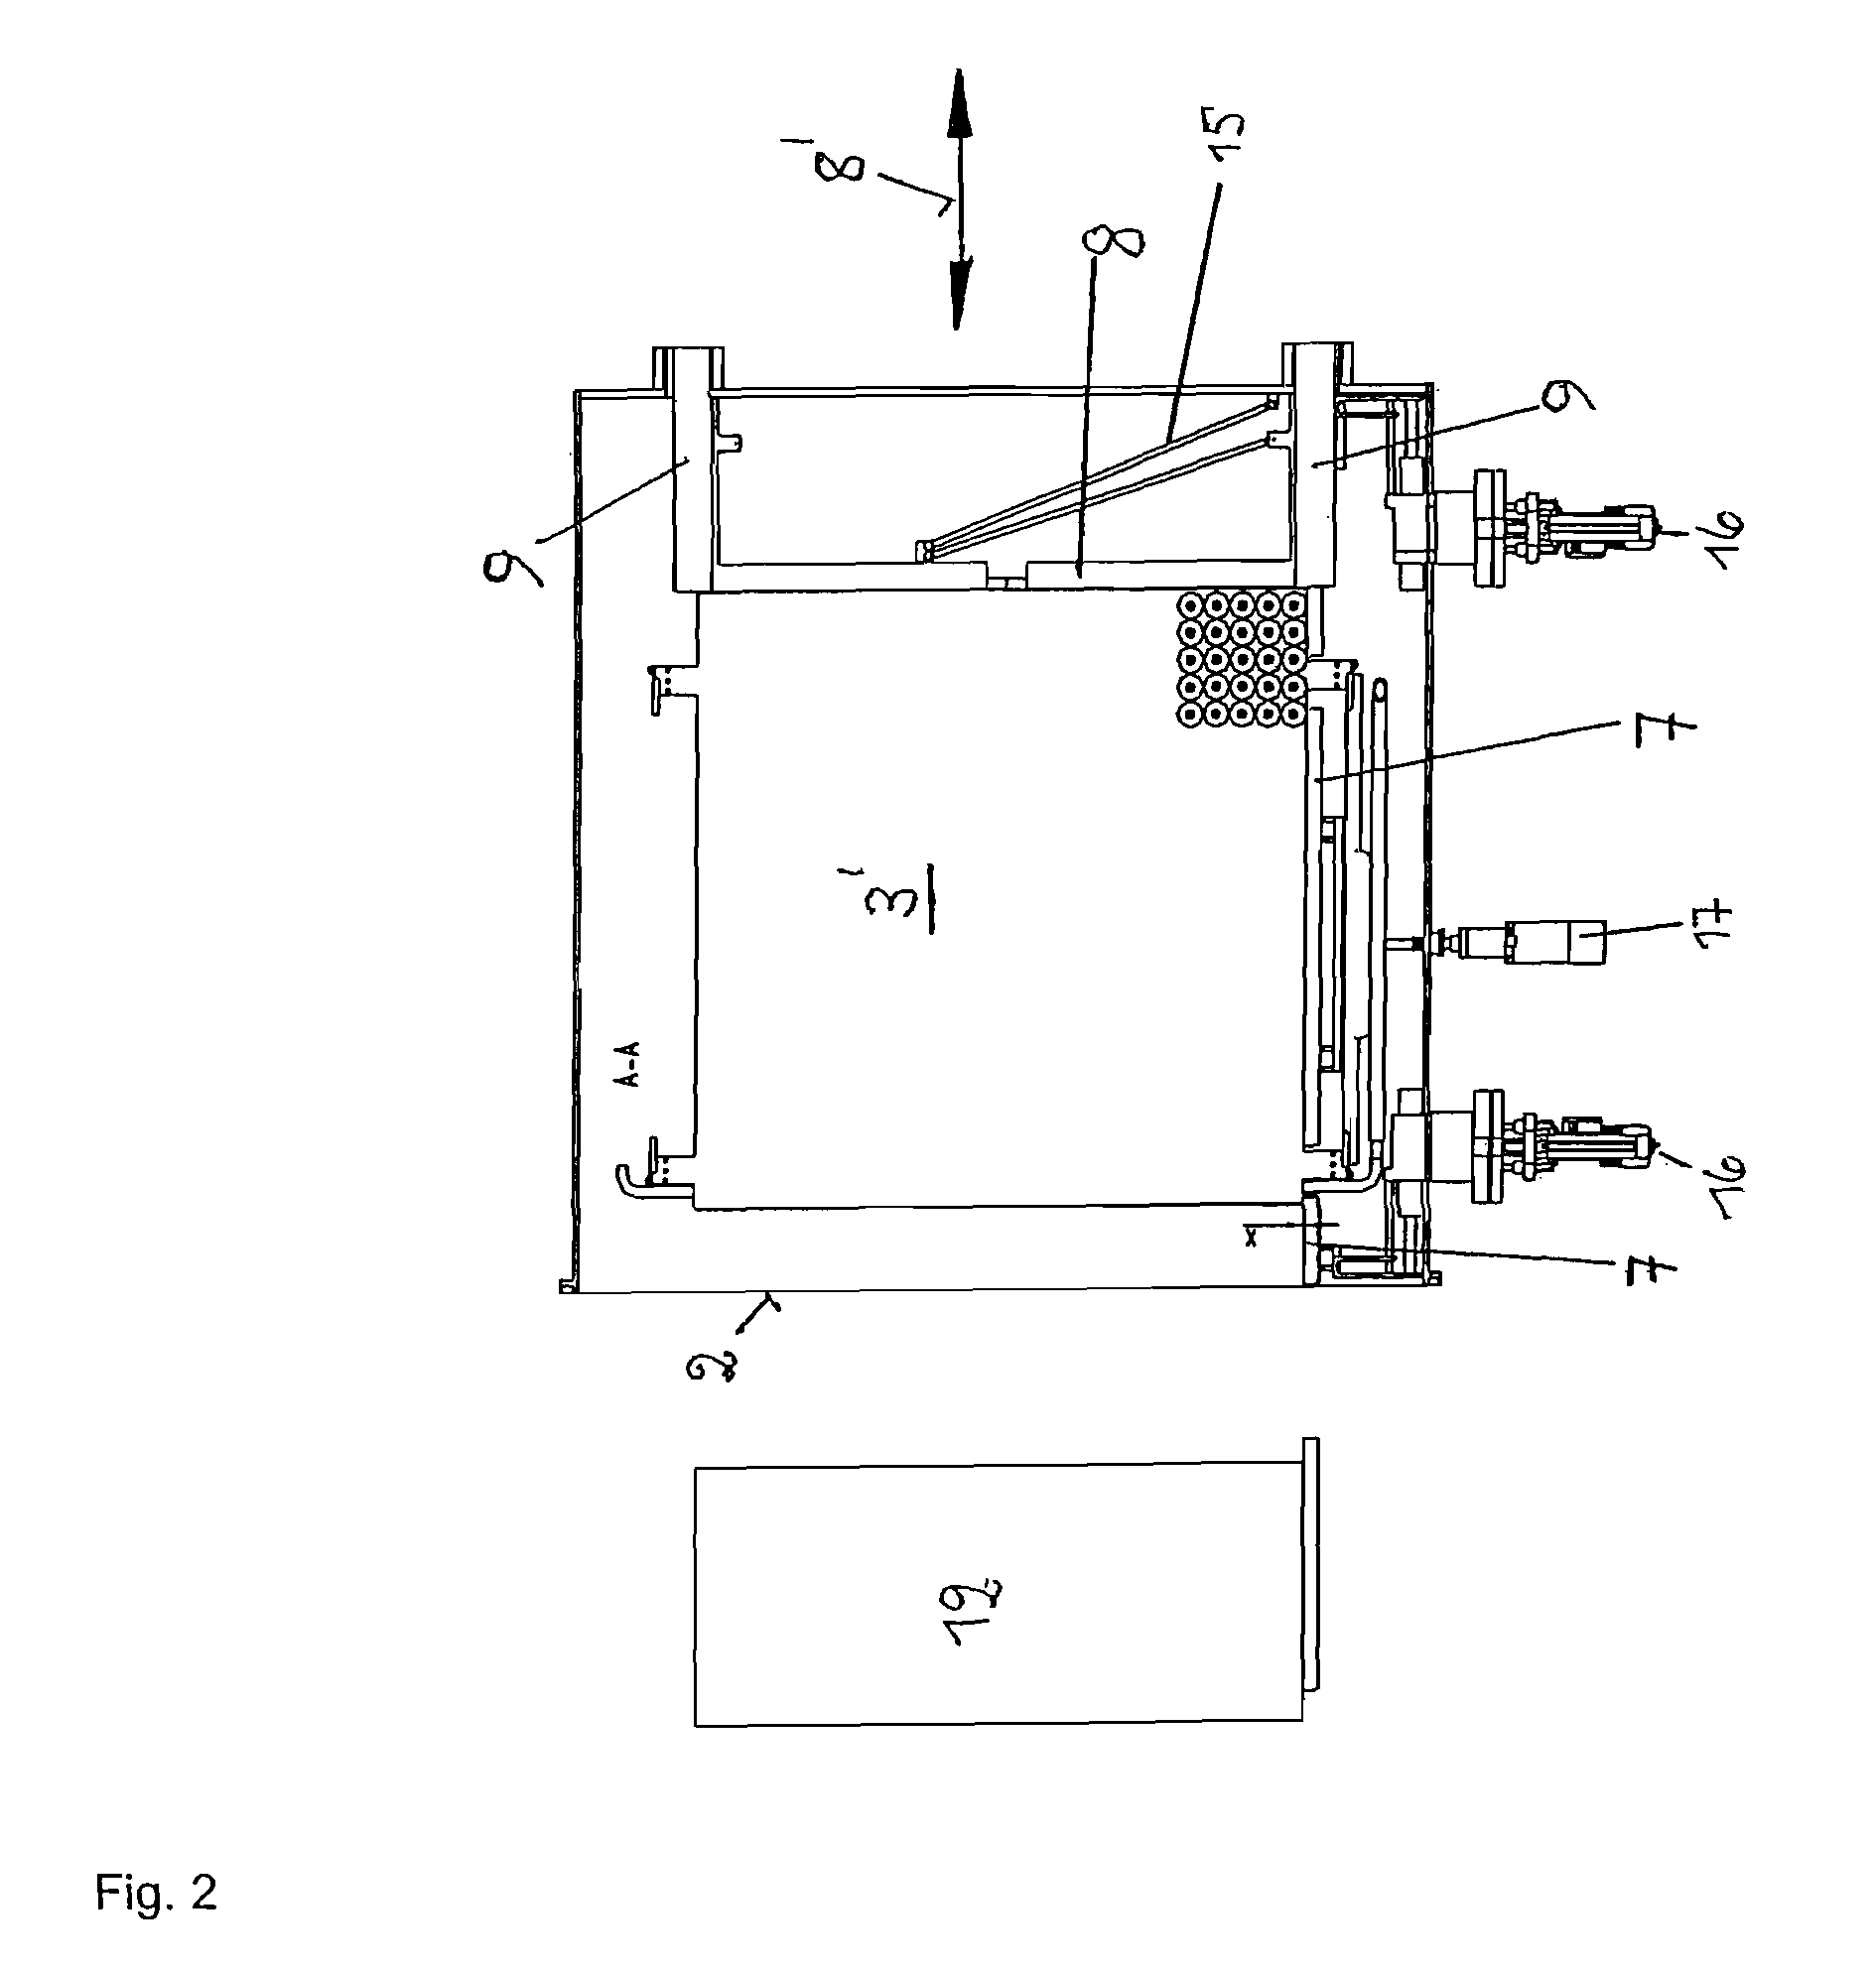 Device for loading and unloading a freeze drying system